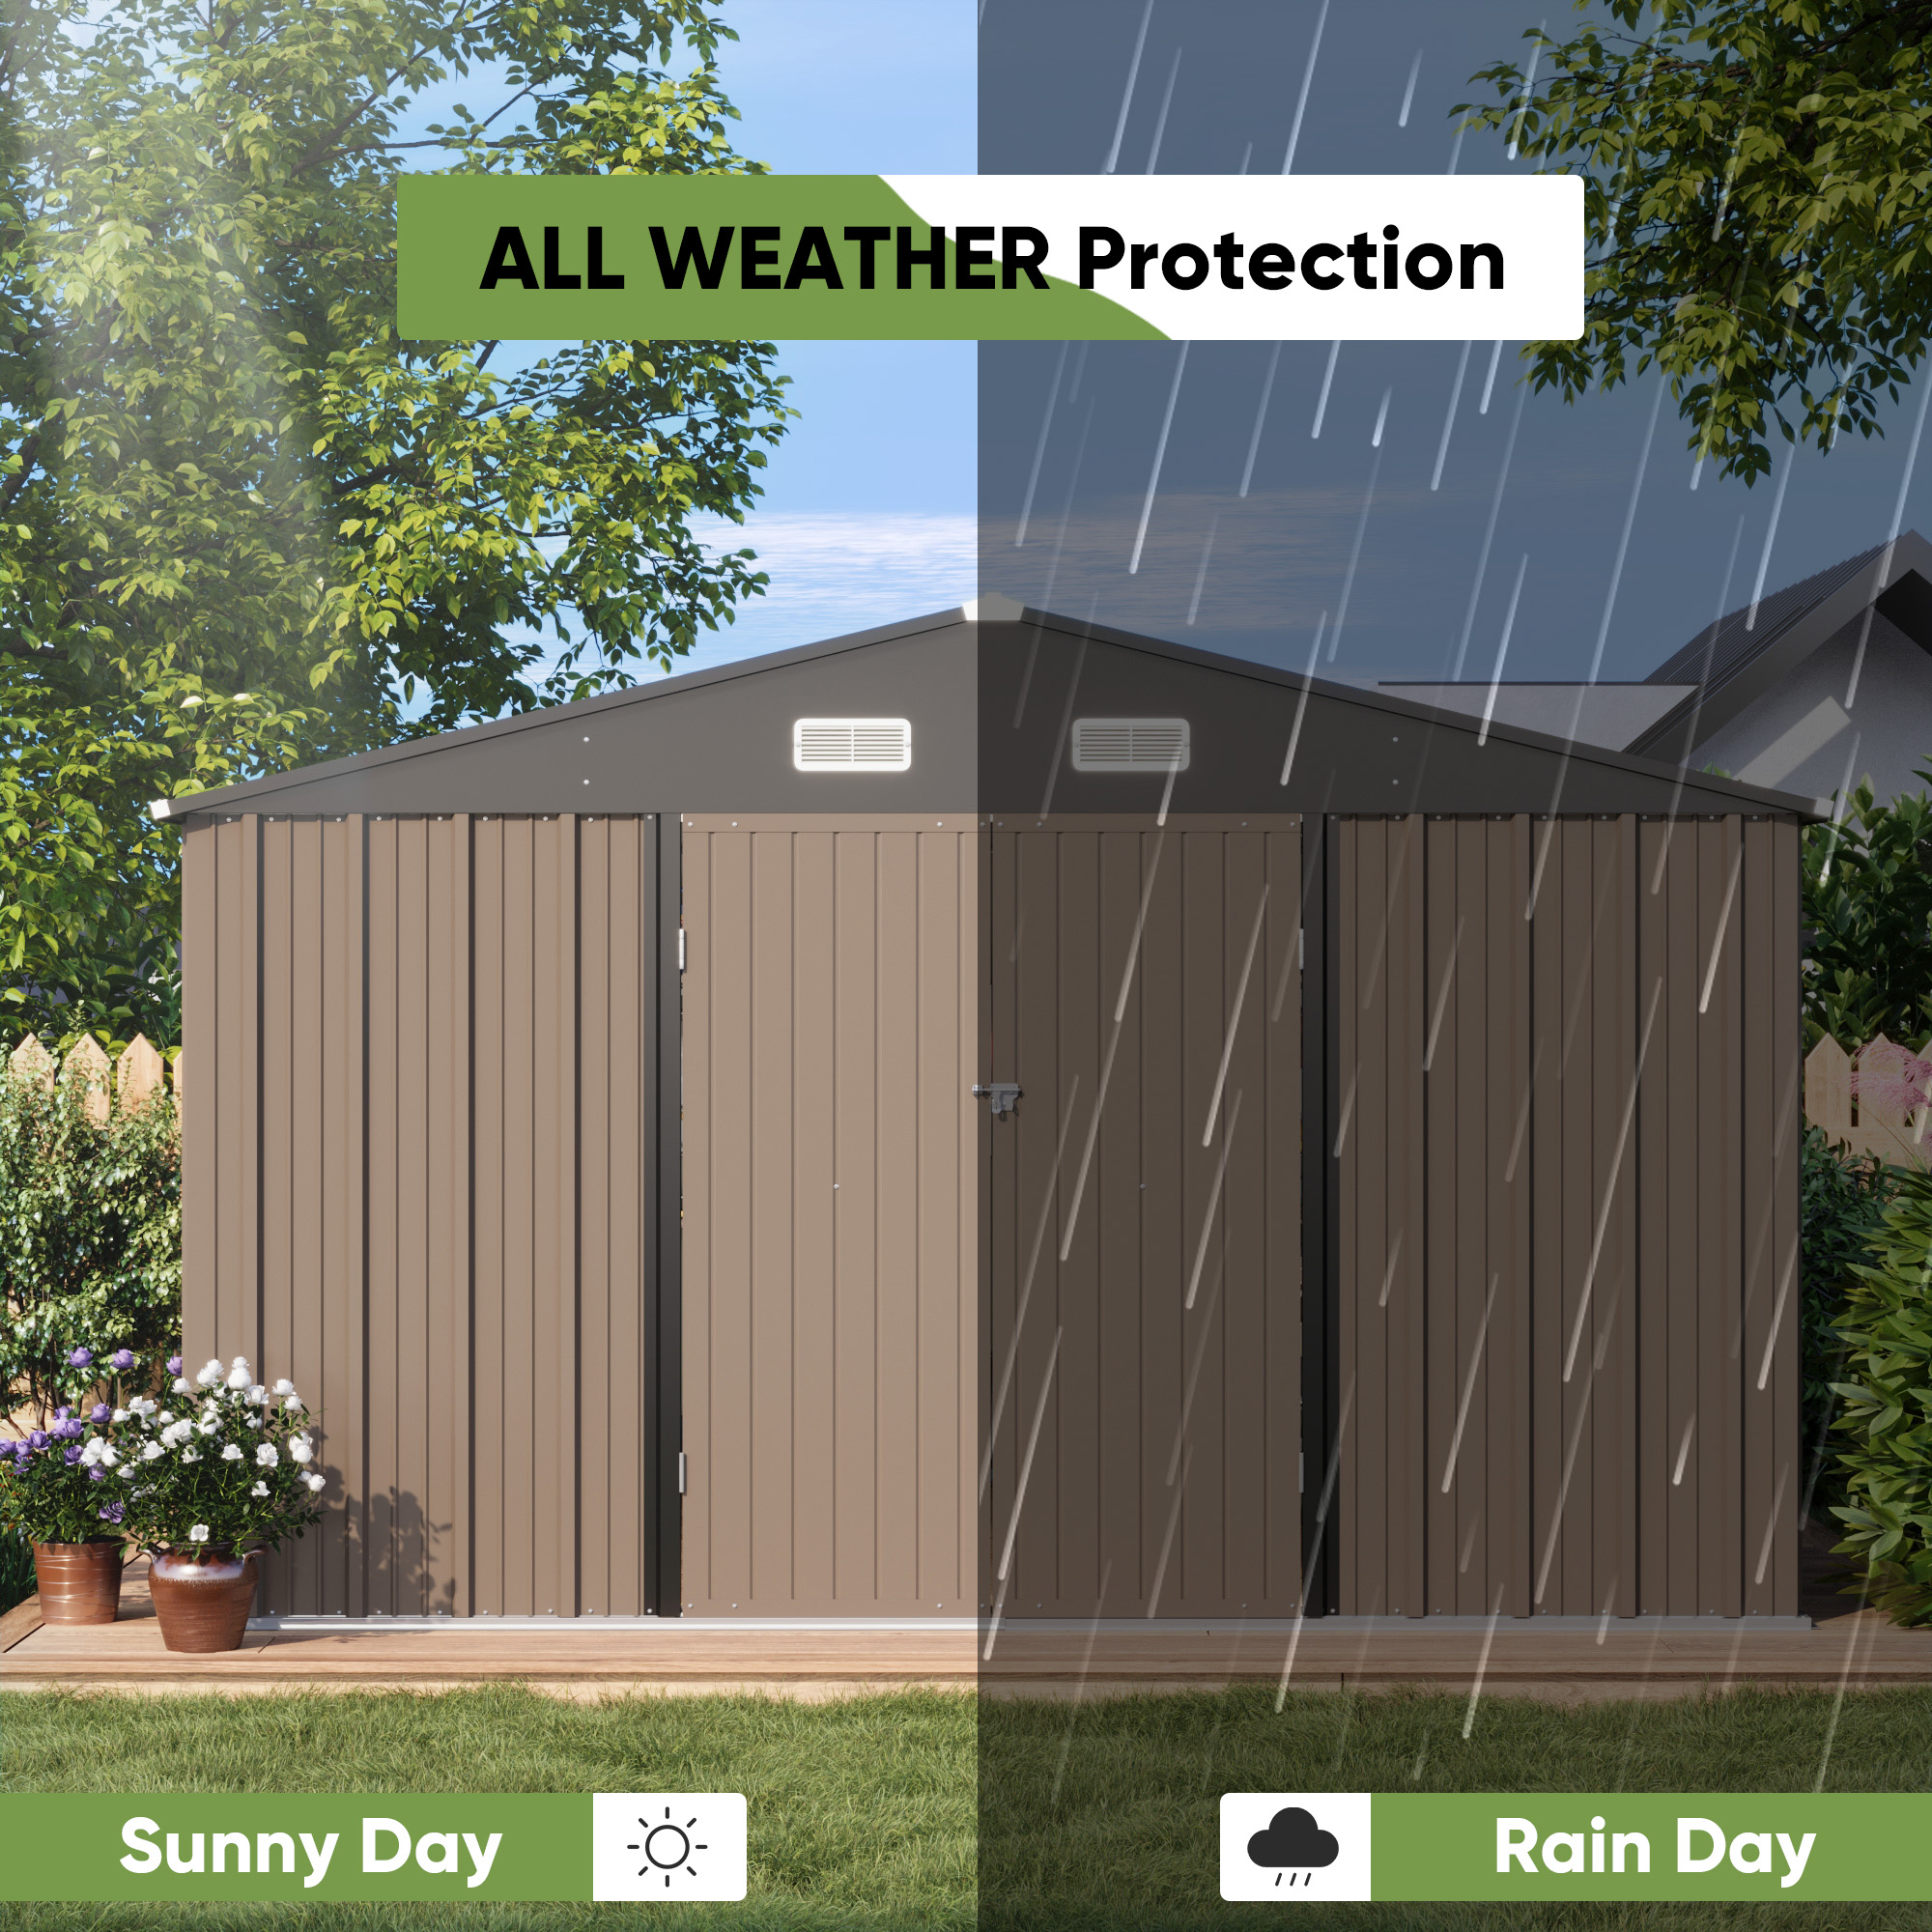 Patiowell Size Upgrade 10 x 10 ft Outdoor Storage Metal Shed with Sloping Roof and Double Lockable Door, Brown - image 5 of 7